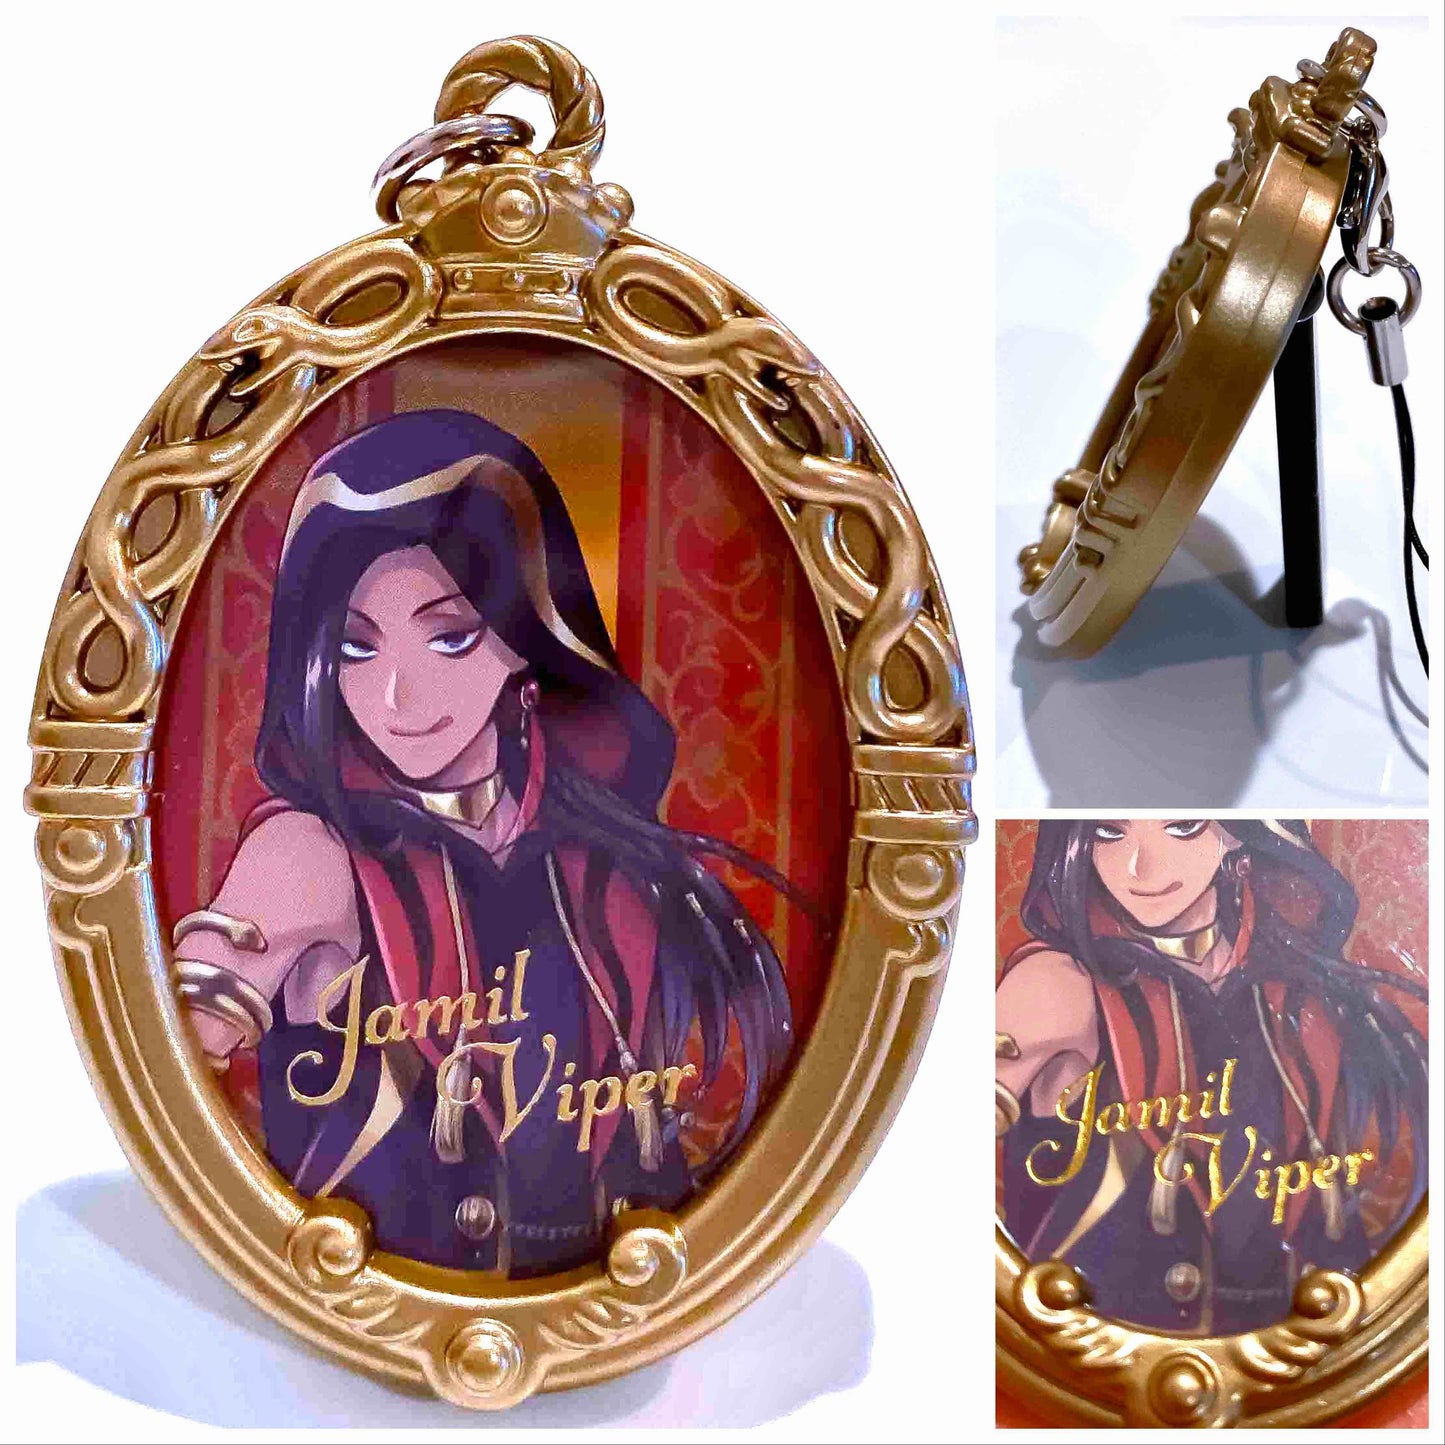 Disney Twisted Wonderland picture frame charm with strap - Savanaclaw, Scarabia, Ignihyde